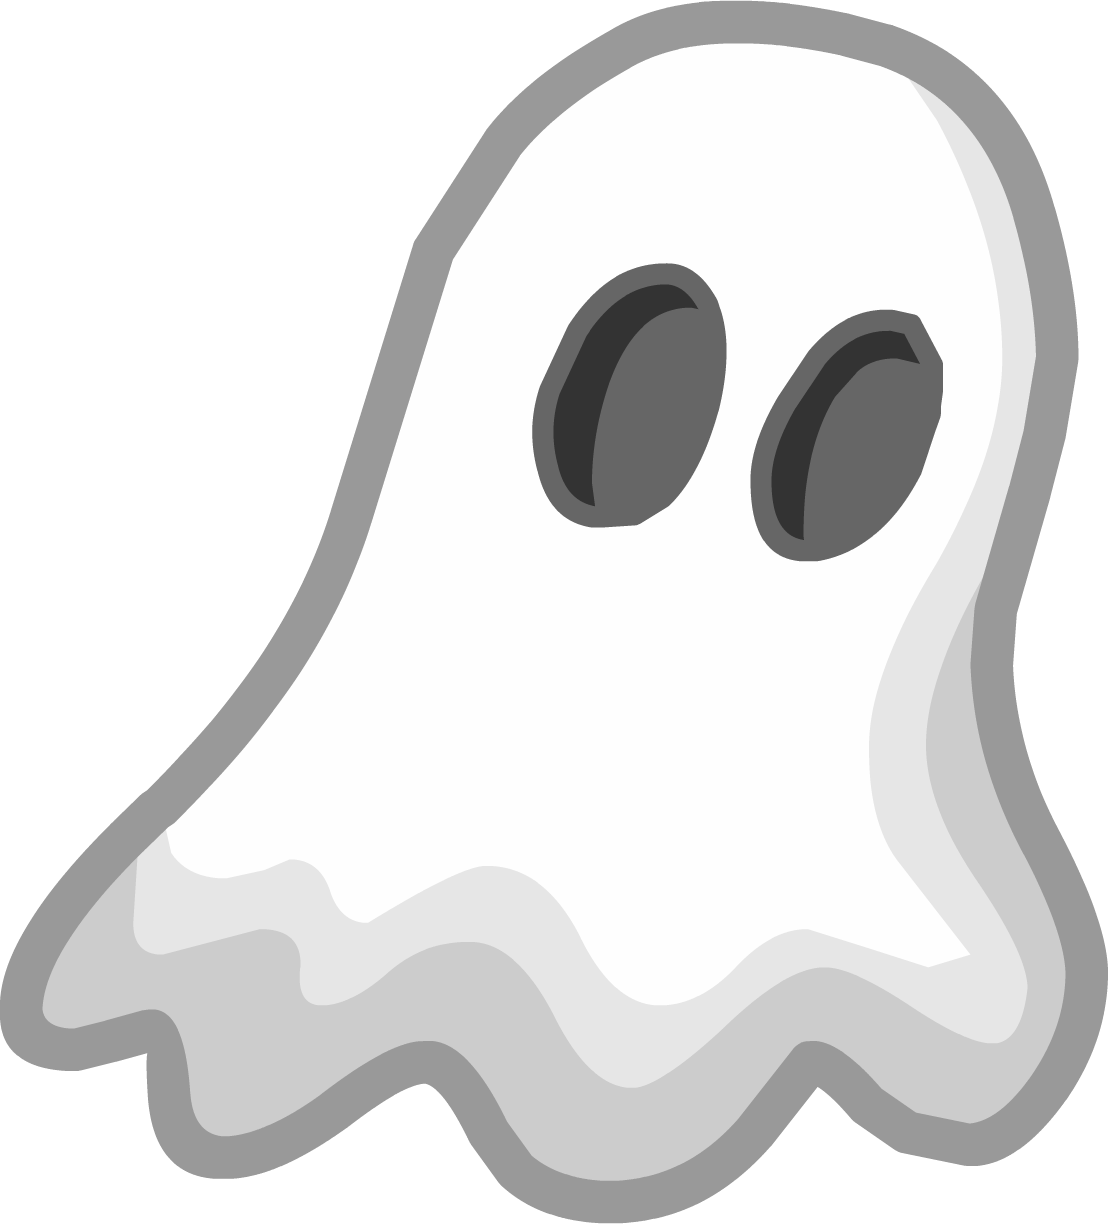 Ghost clipart ghosts and goblin. Png image with transparent